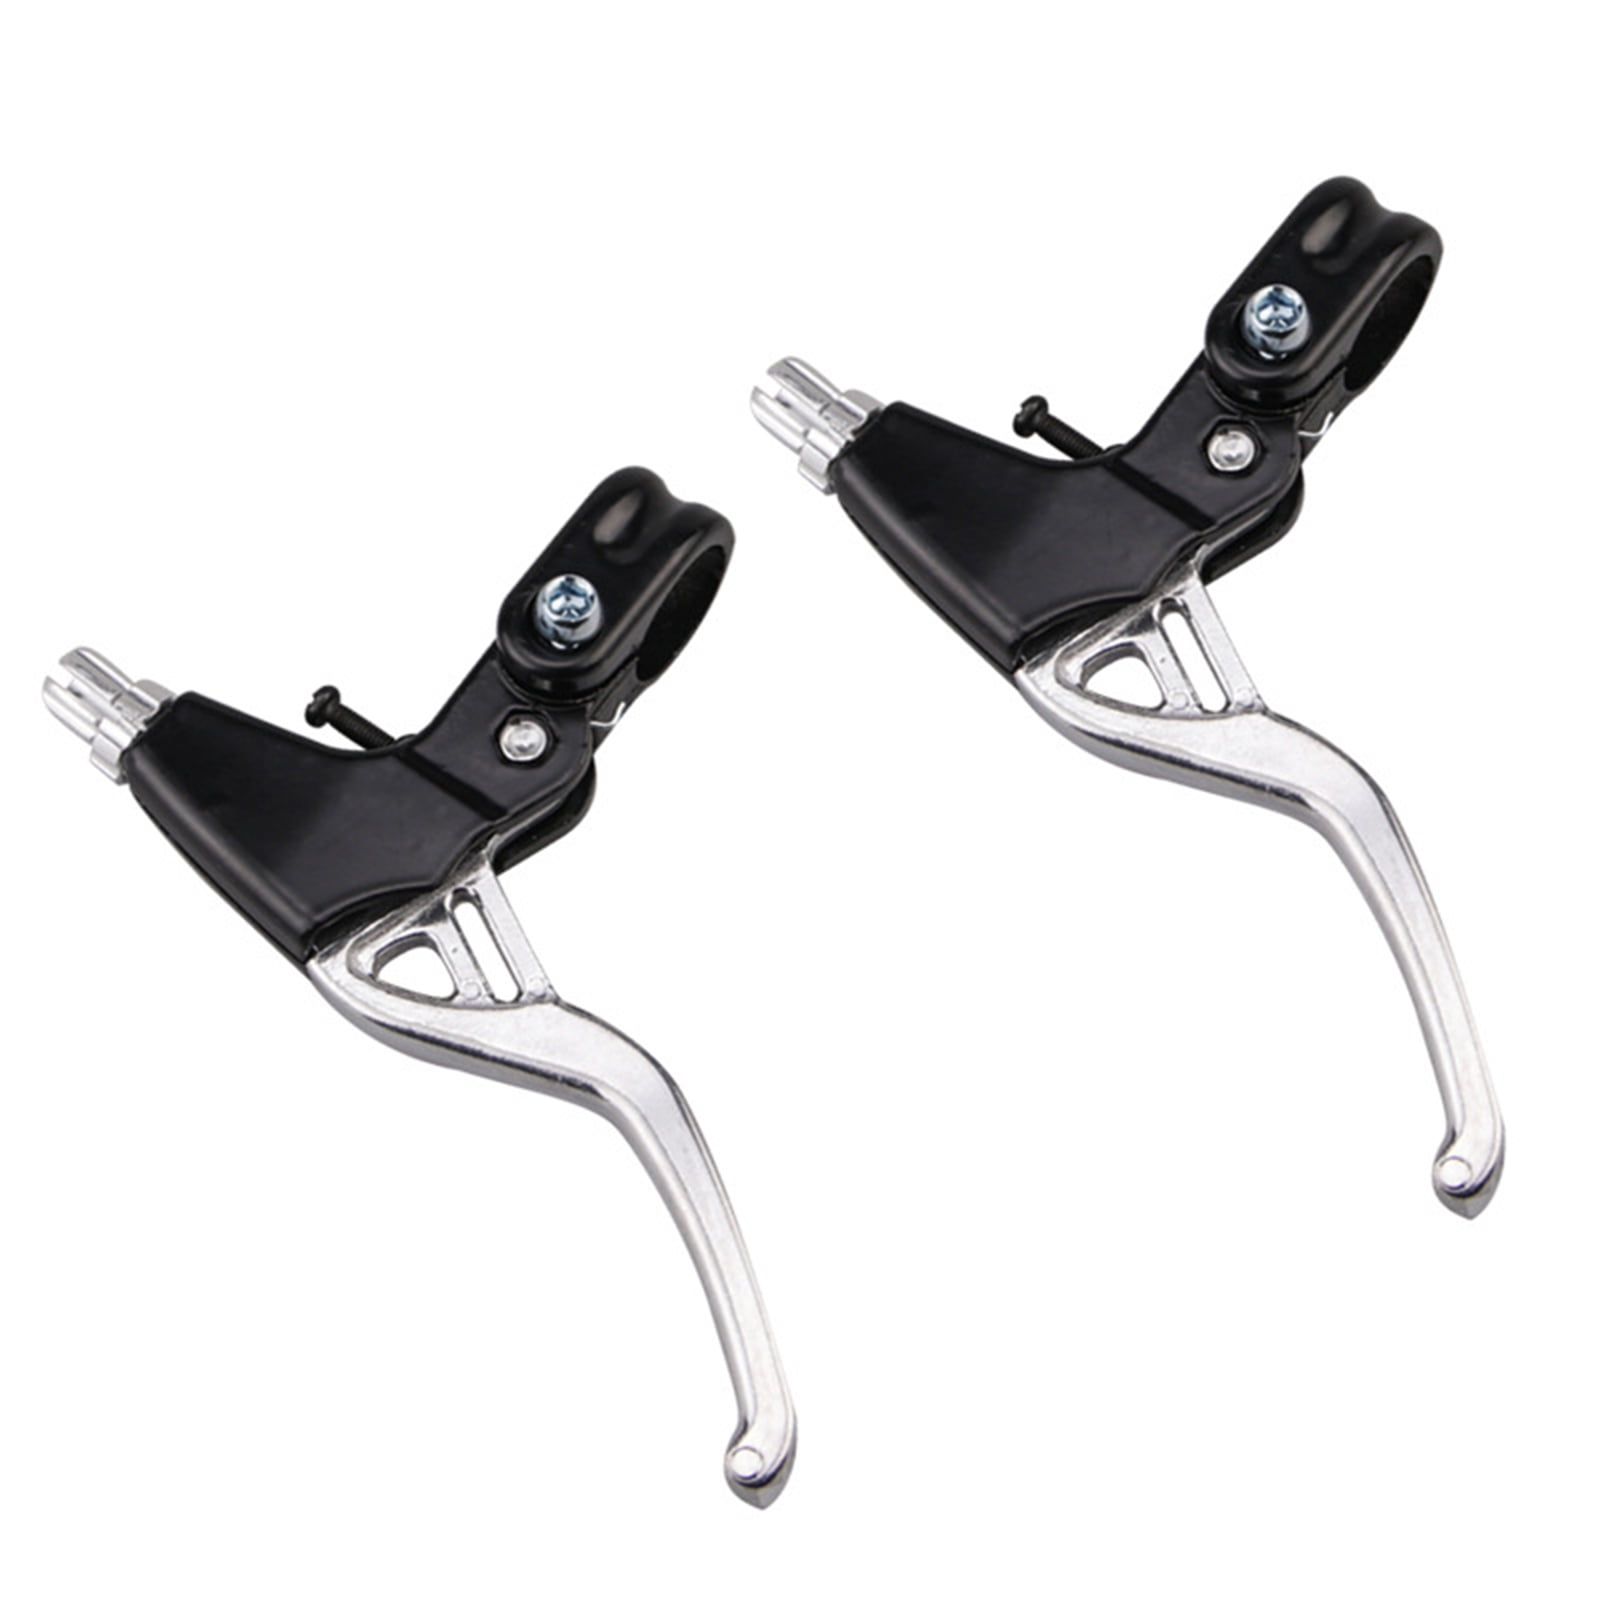 Cycling Brake Levers Lightweight Bicycle Aluminum Mountain 2Pcs 2-Finger Fit 